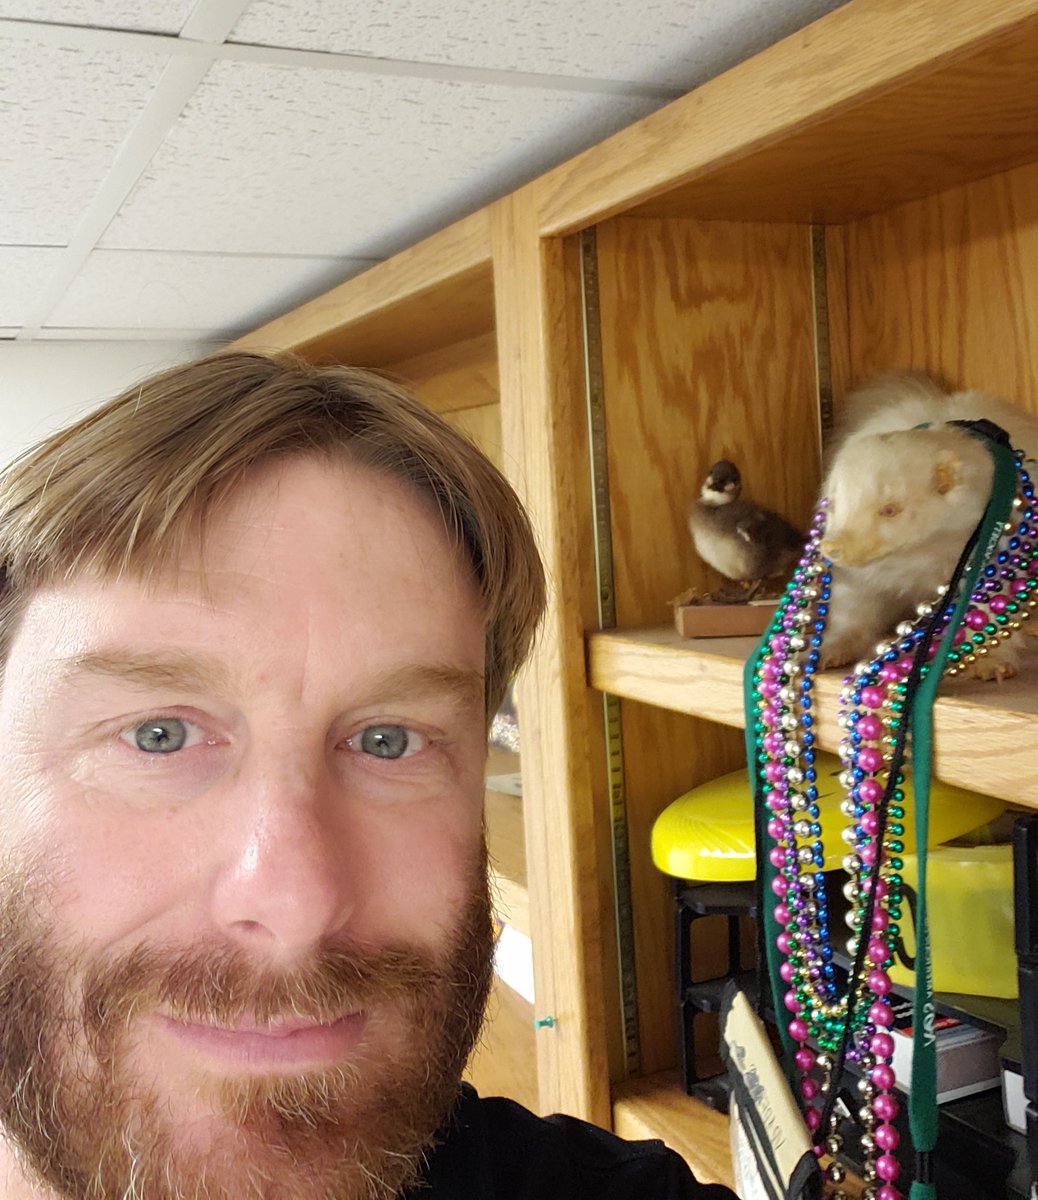 My #MuseumSelfie in my office in the basement of the @LSU_MNS with my office buddies for #MuseumSelfieDay